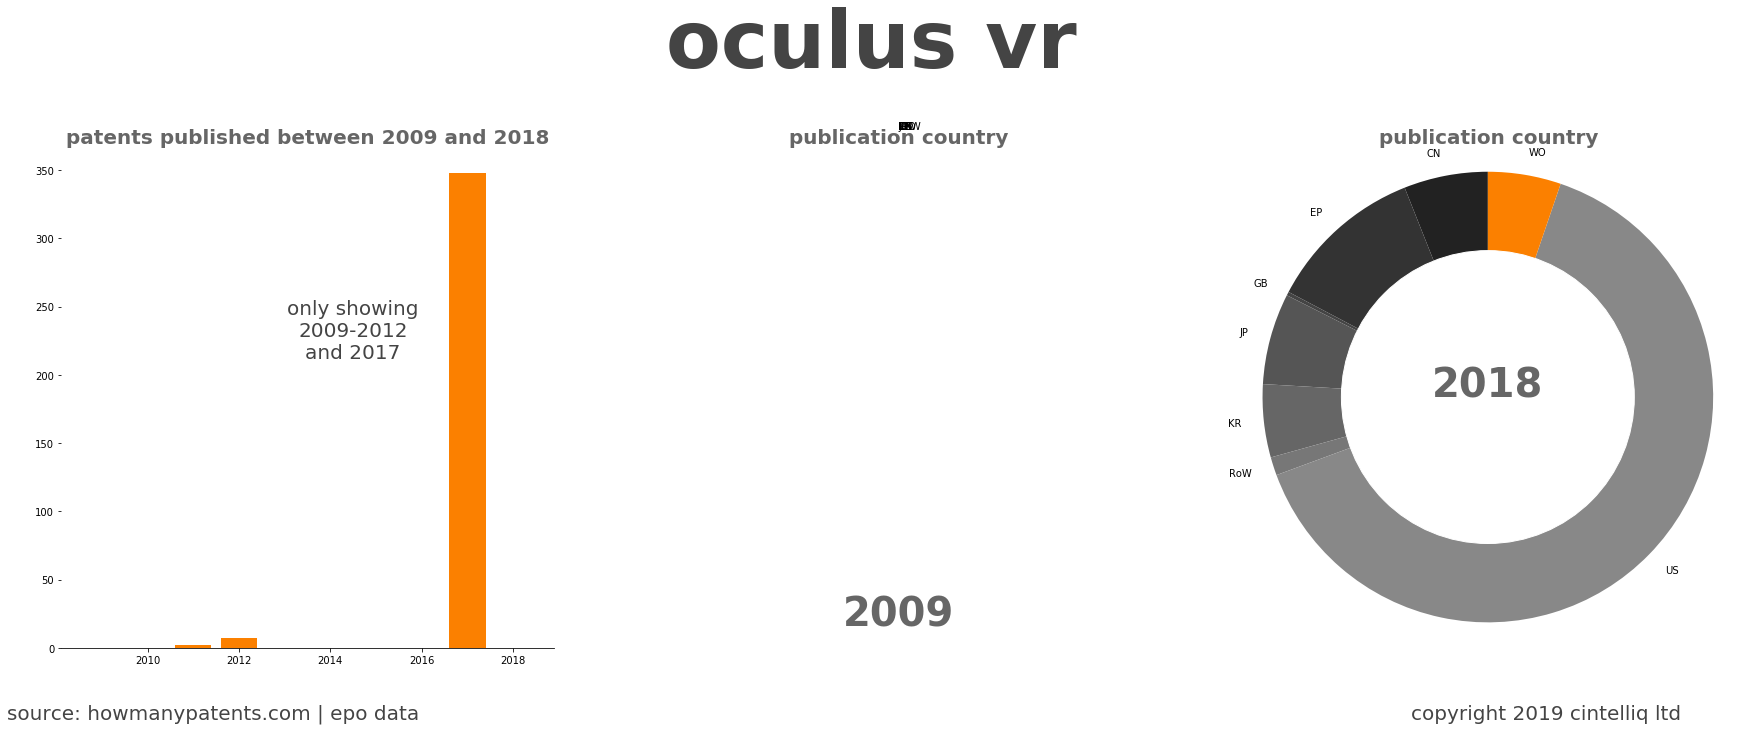 summary of patents for Oculus Vr